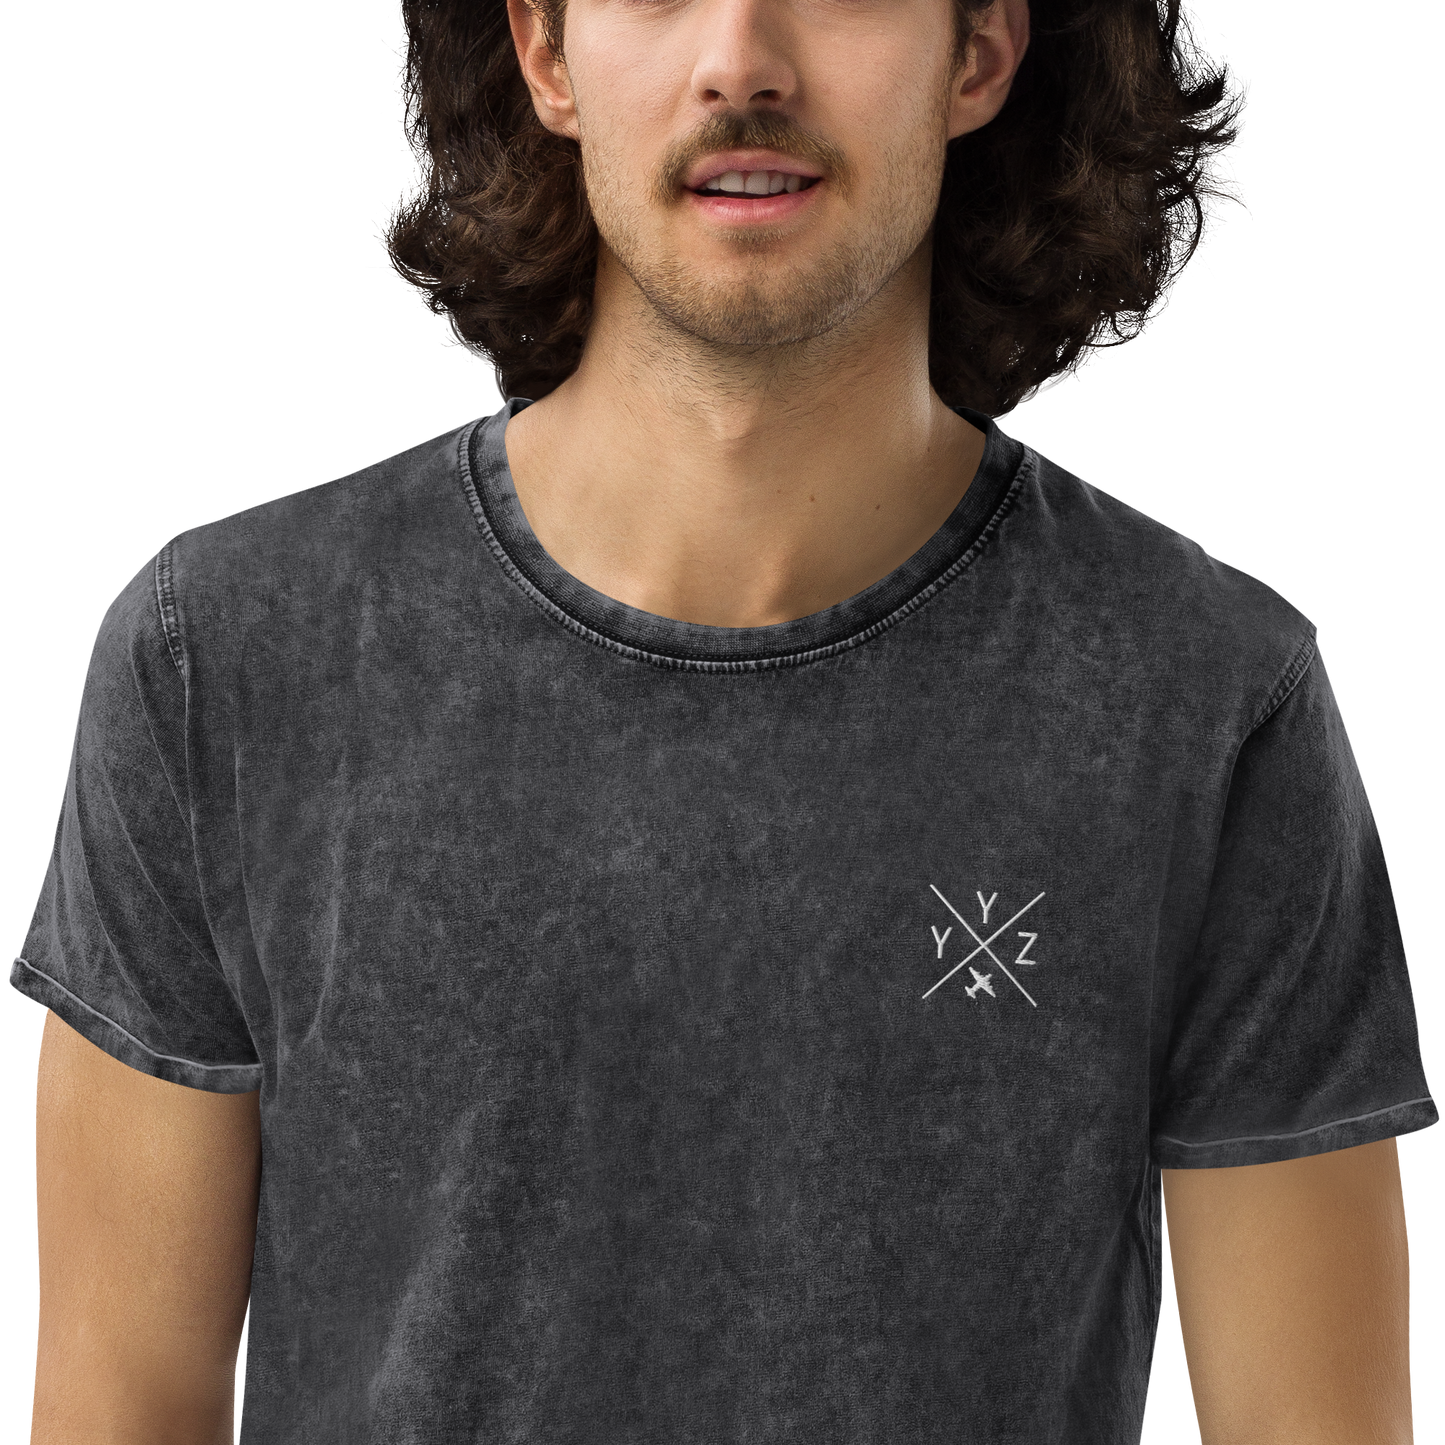 YHM Designs - YYZ Toronto Denim T-Shirt - Crossed-X Design with Airport Code and Vintage Propliner - White Embroidery - Image 07